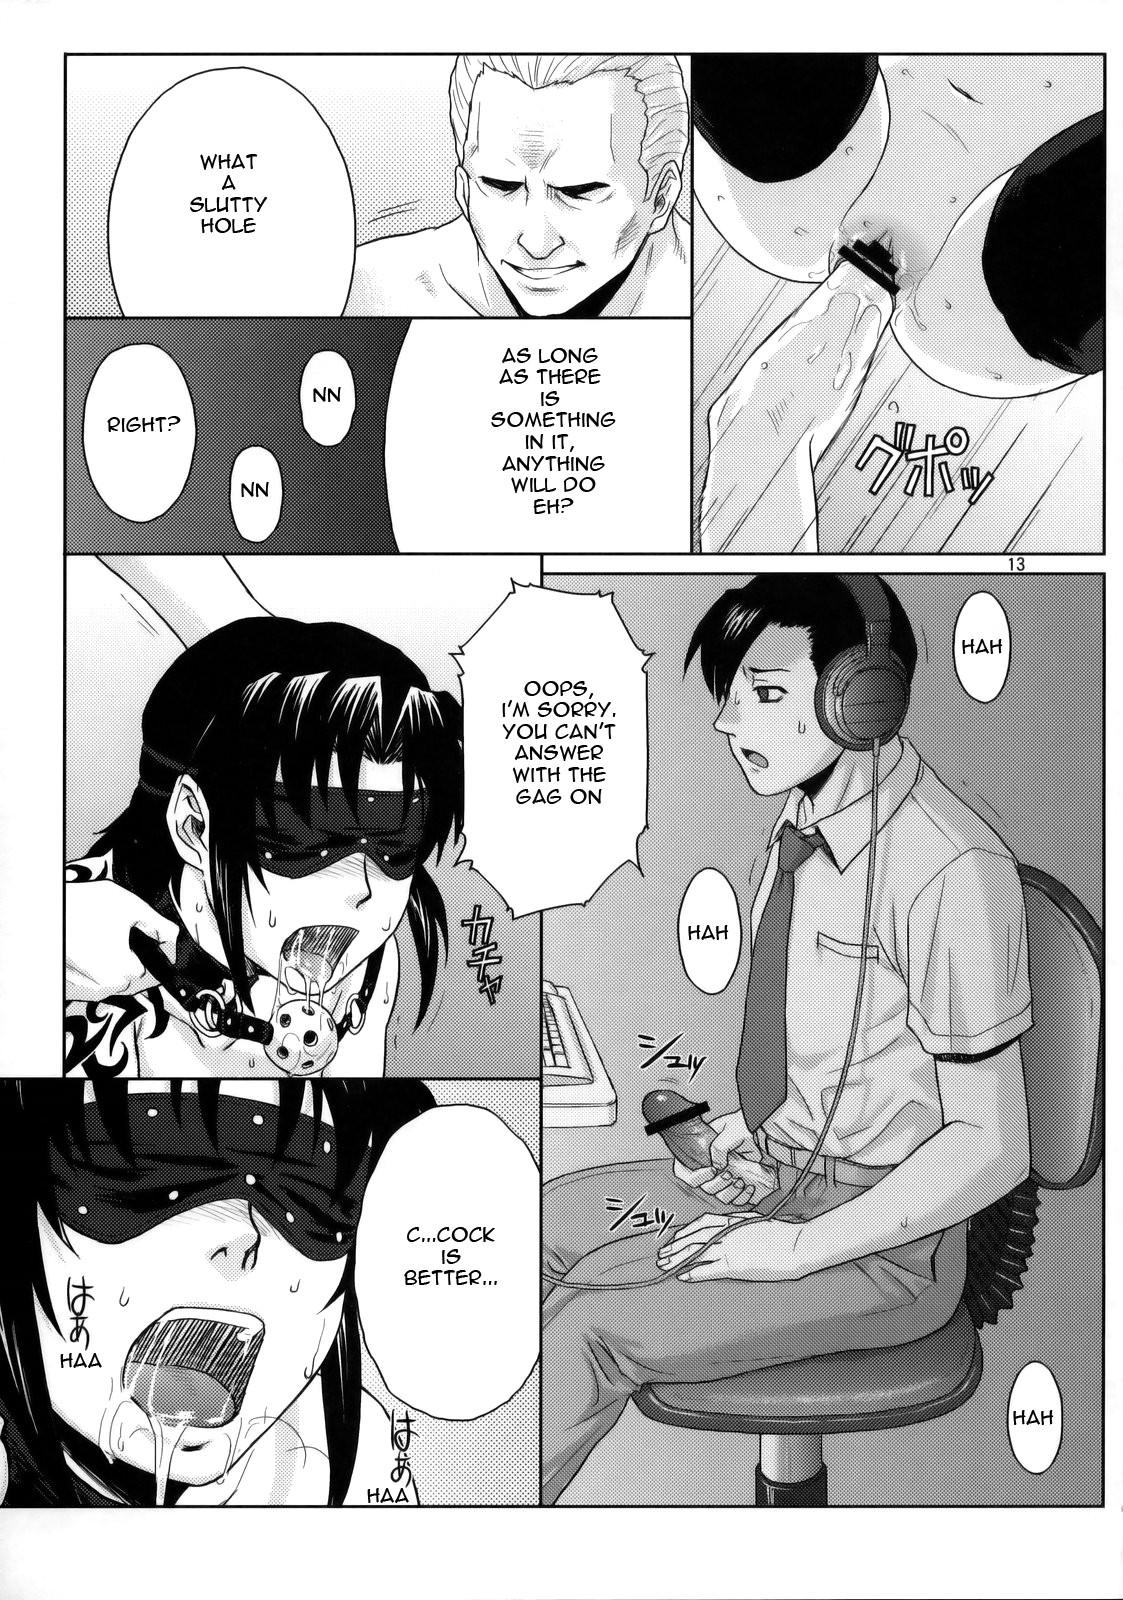 All WELCOME TO THE FUCKIN' PARADISE - Black lagoon Blowjob - Page 12